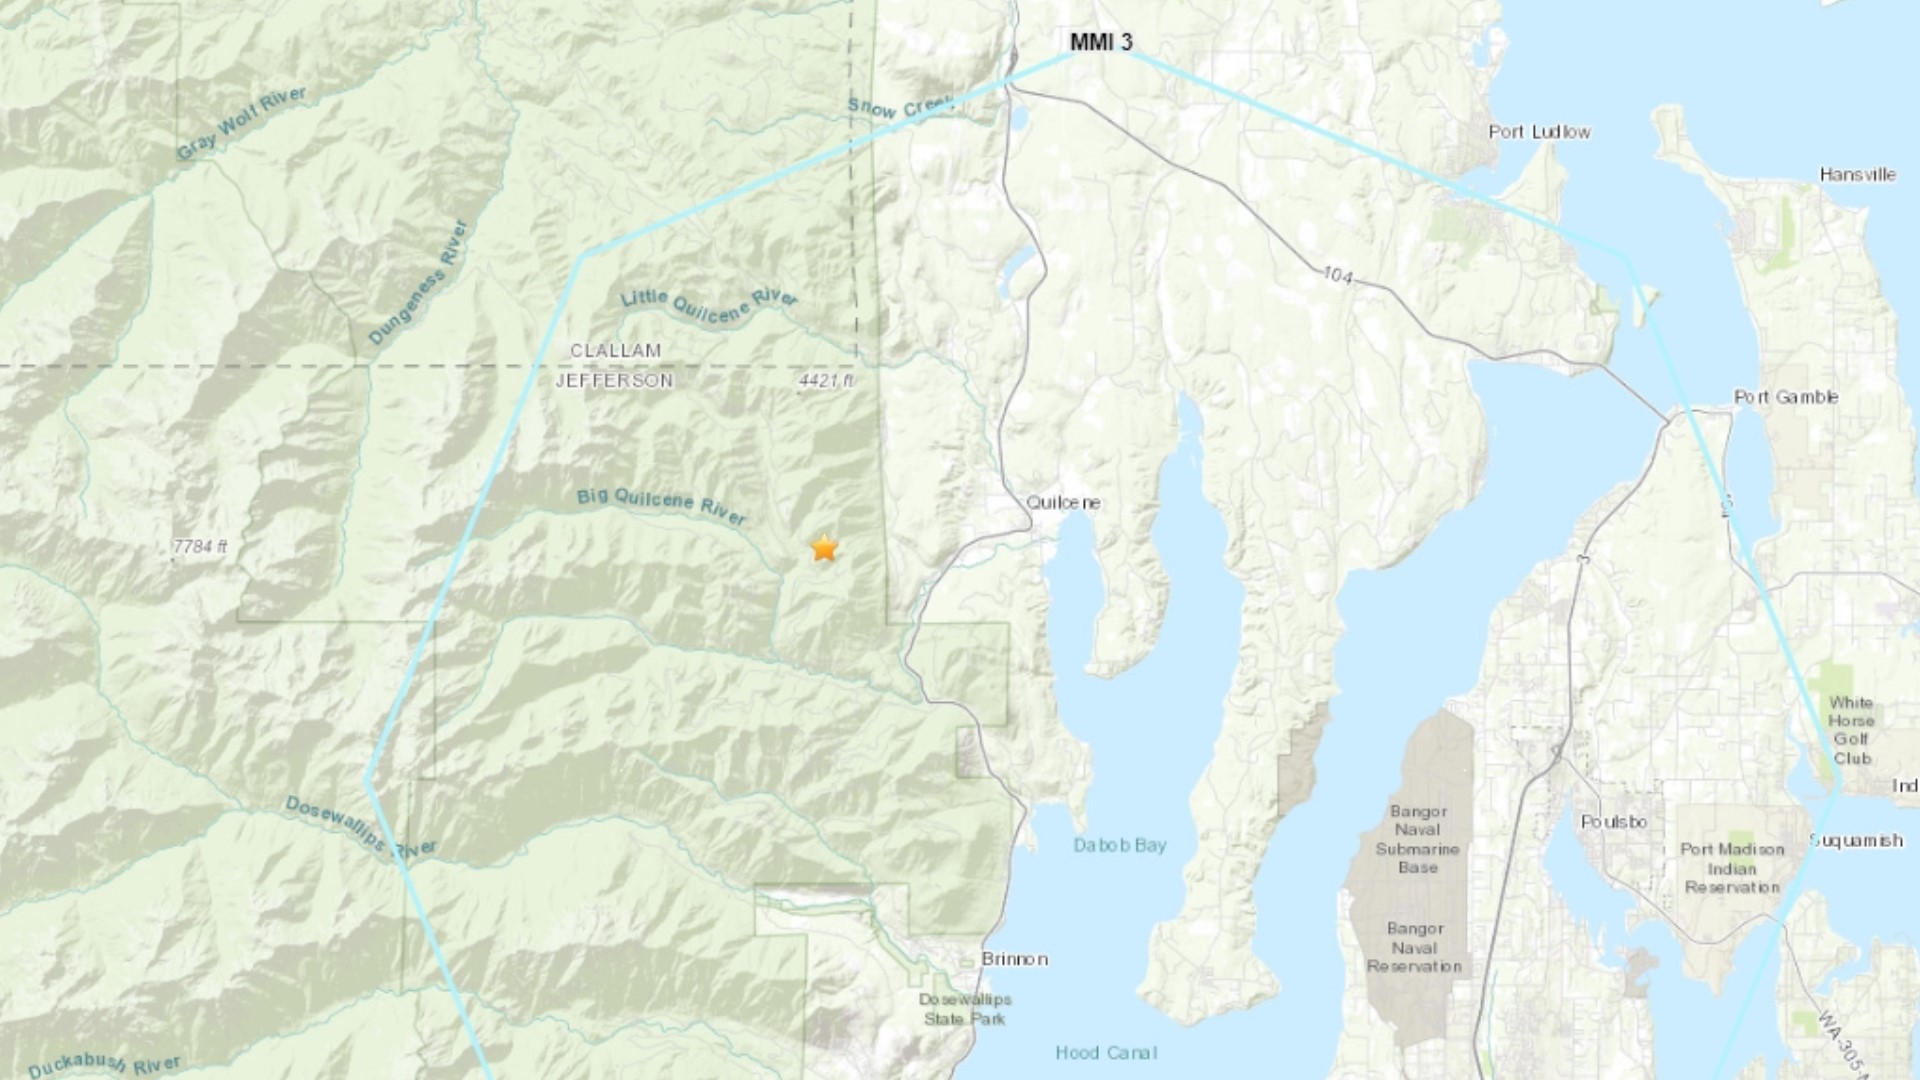 The United States Geological Survey (USGS) reported a magnitude 4 earthquake in Jefferson County Sunday morning.